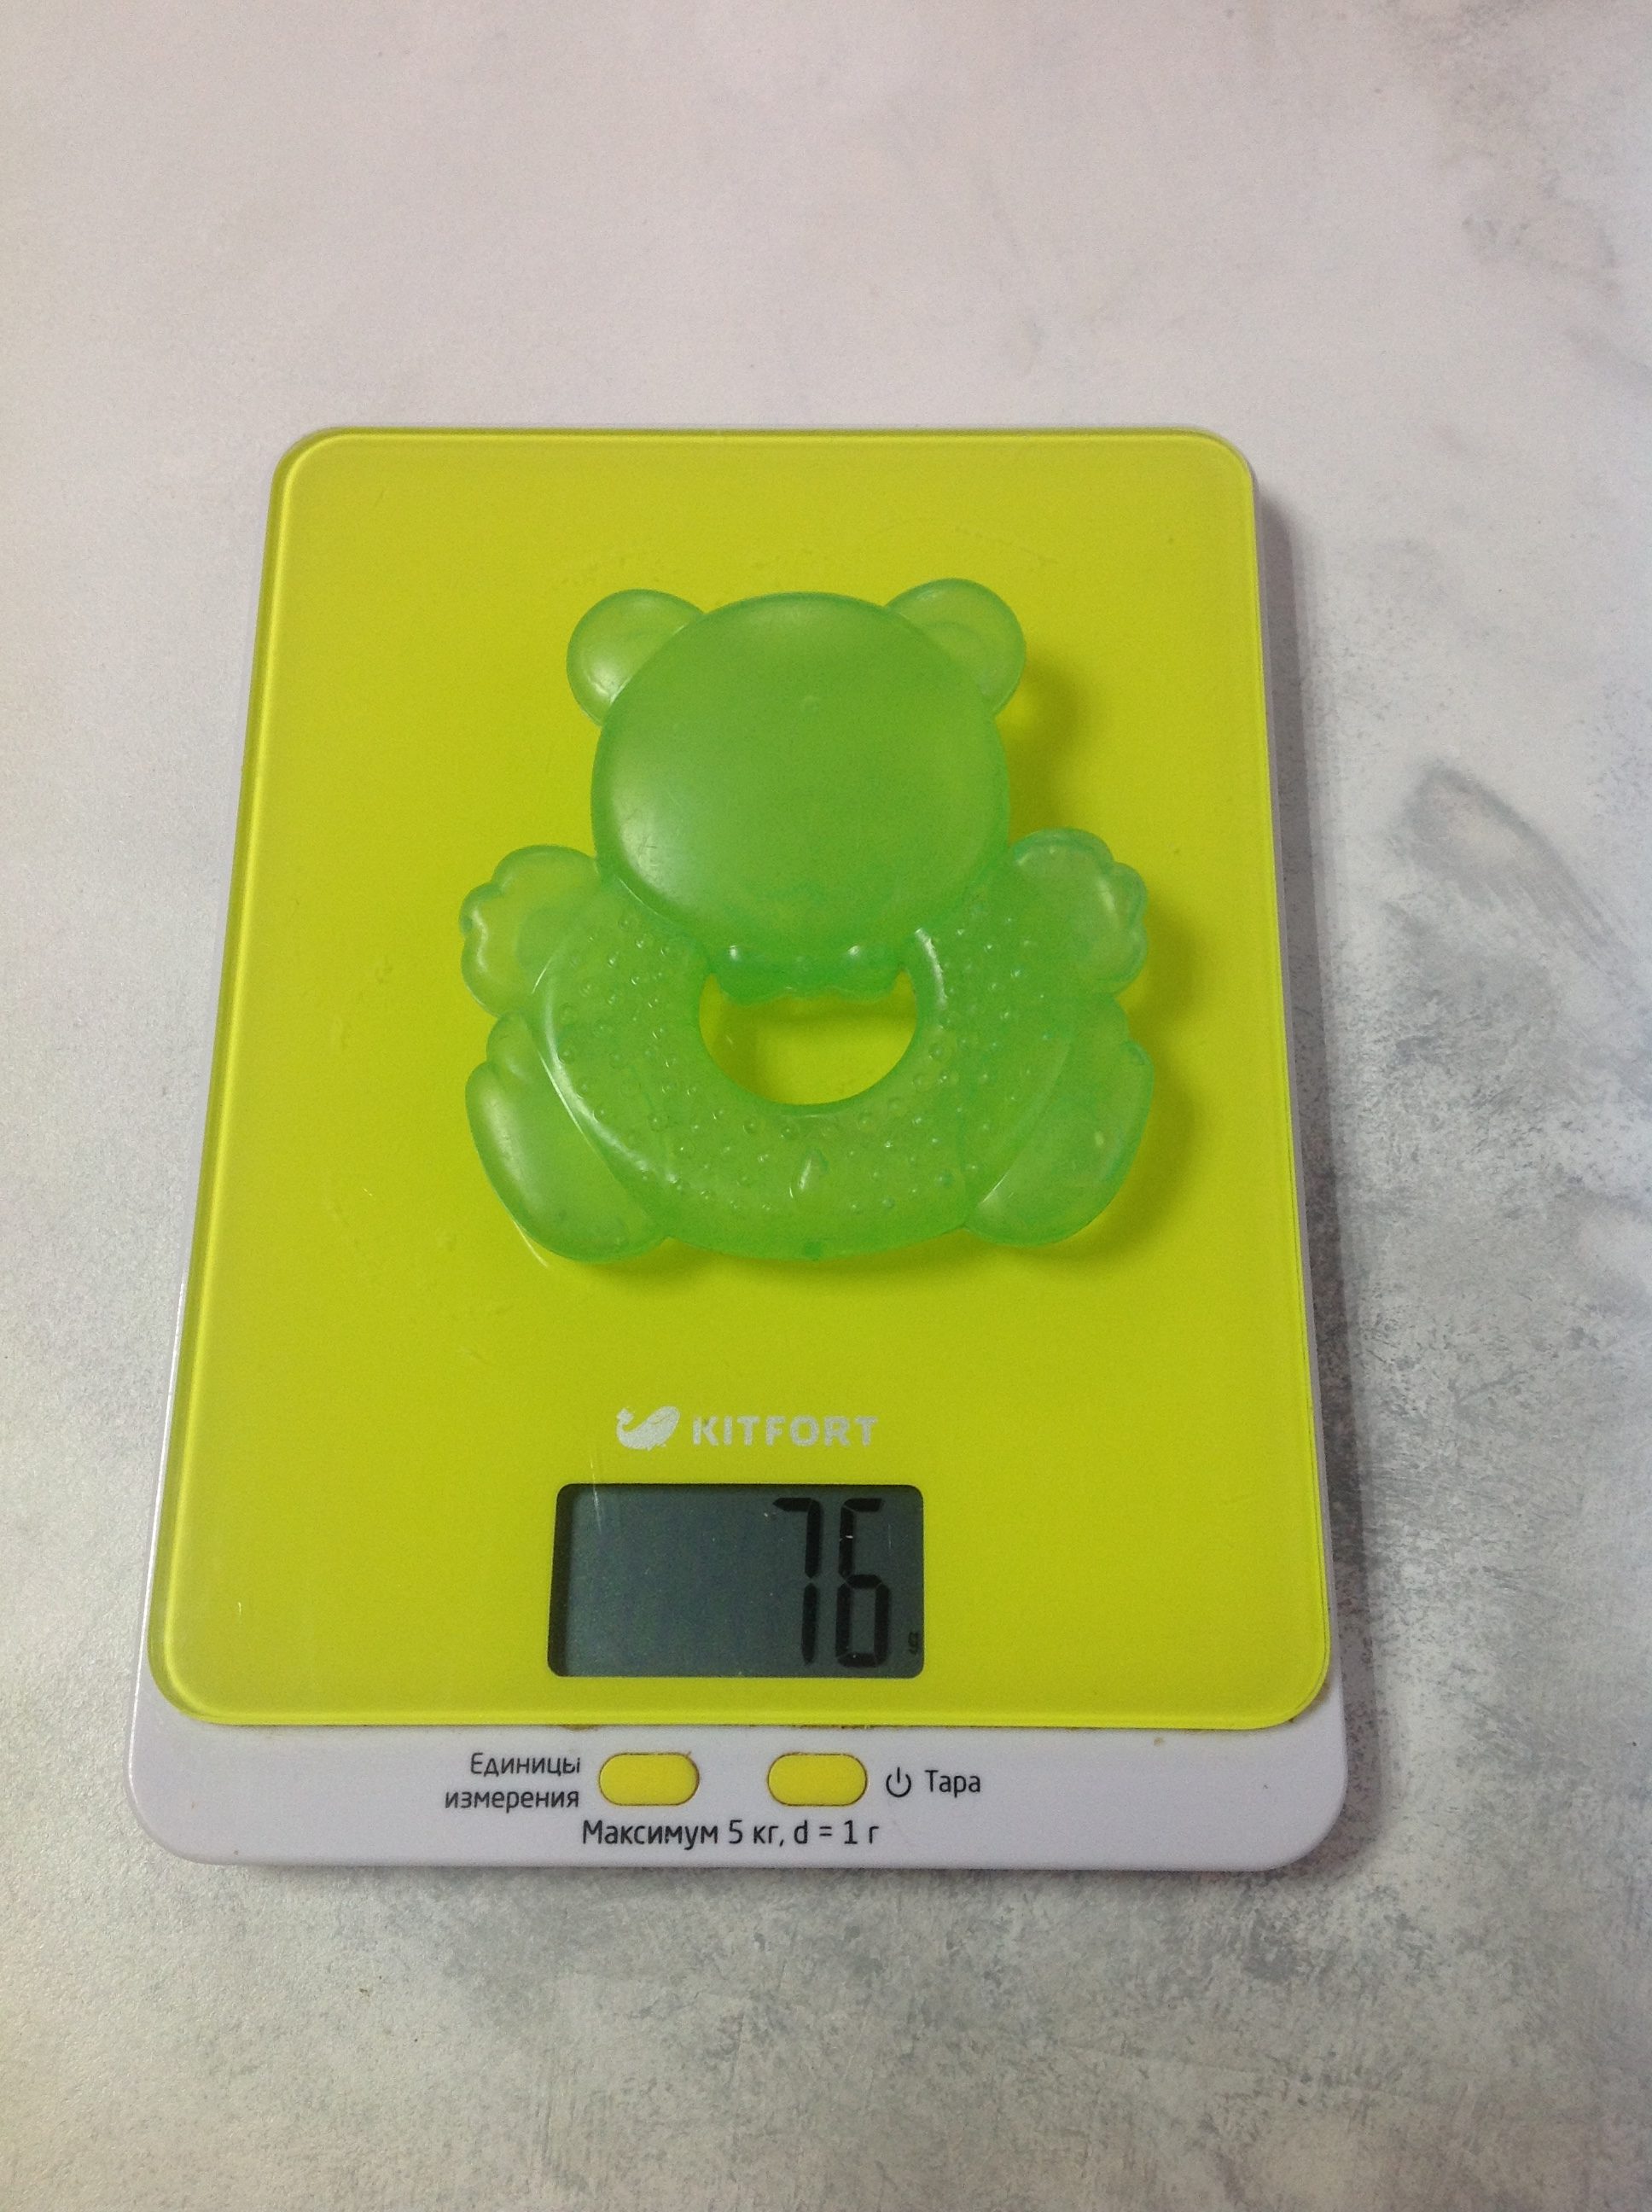 How much does a baby silicone teether with water weigh?